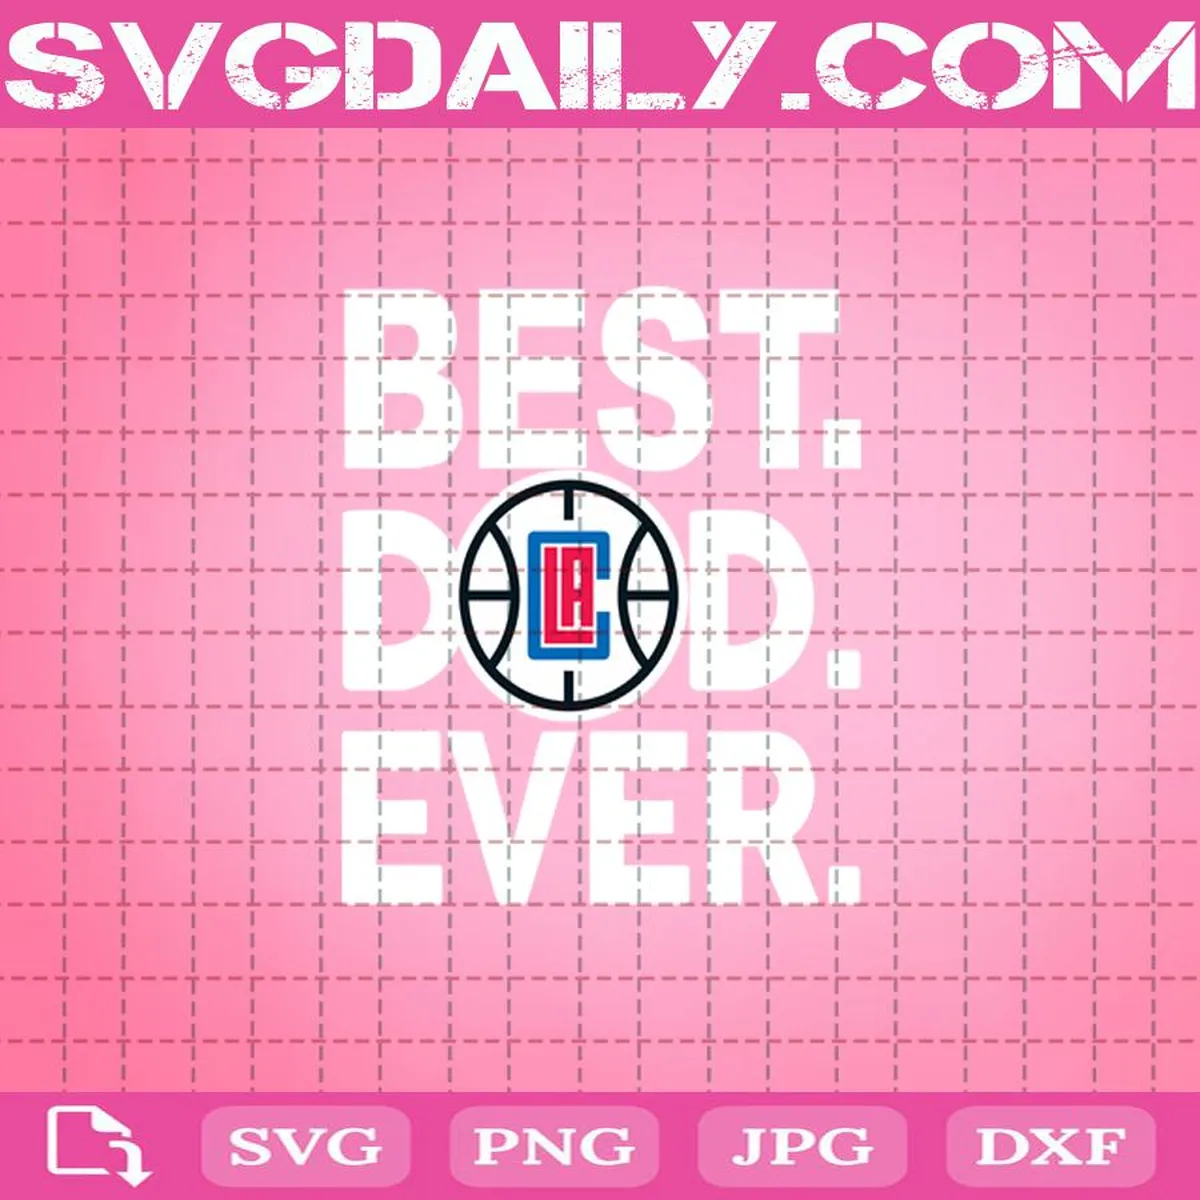 Los Angeles Clippers Best Dad Ever Svg, Best Dad Ever Svg, NBA Svg, Los Angeles Clippers Svg, NBA Sports Svg, Basketball Svg, Father’s Day Svg